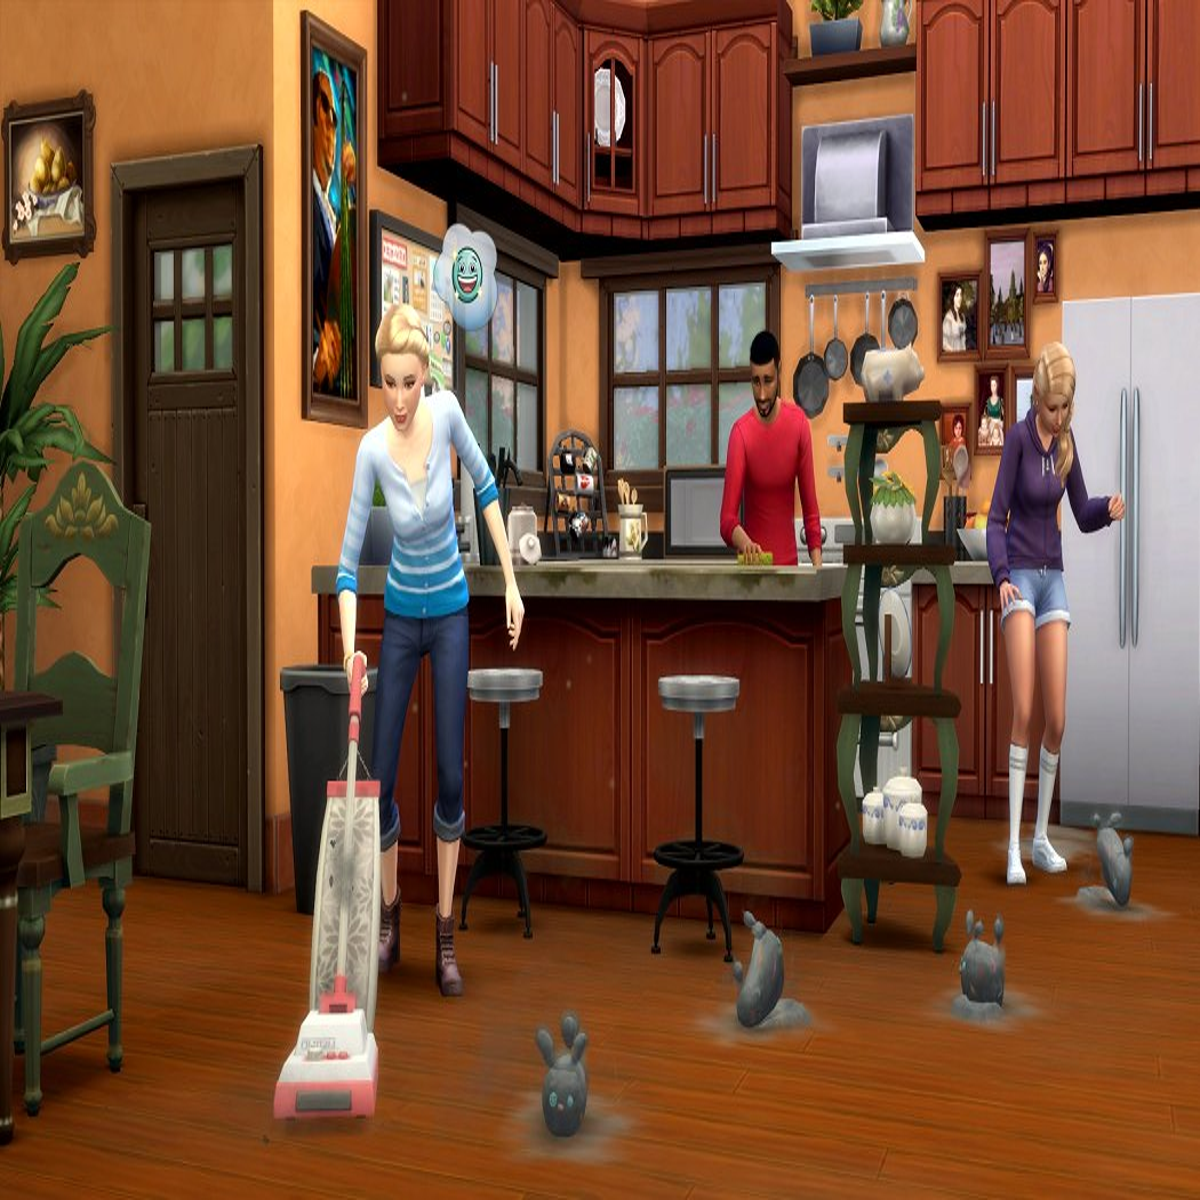 The Sims 5 Could Be Free-To-Play But Full of Microtransactions